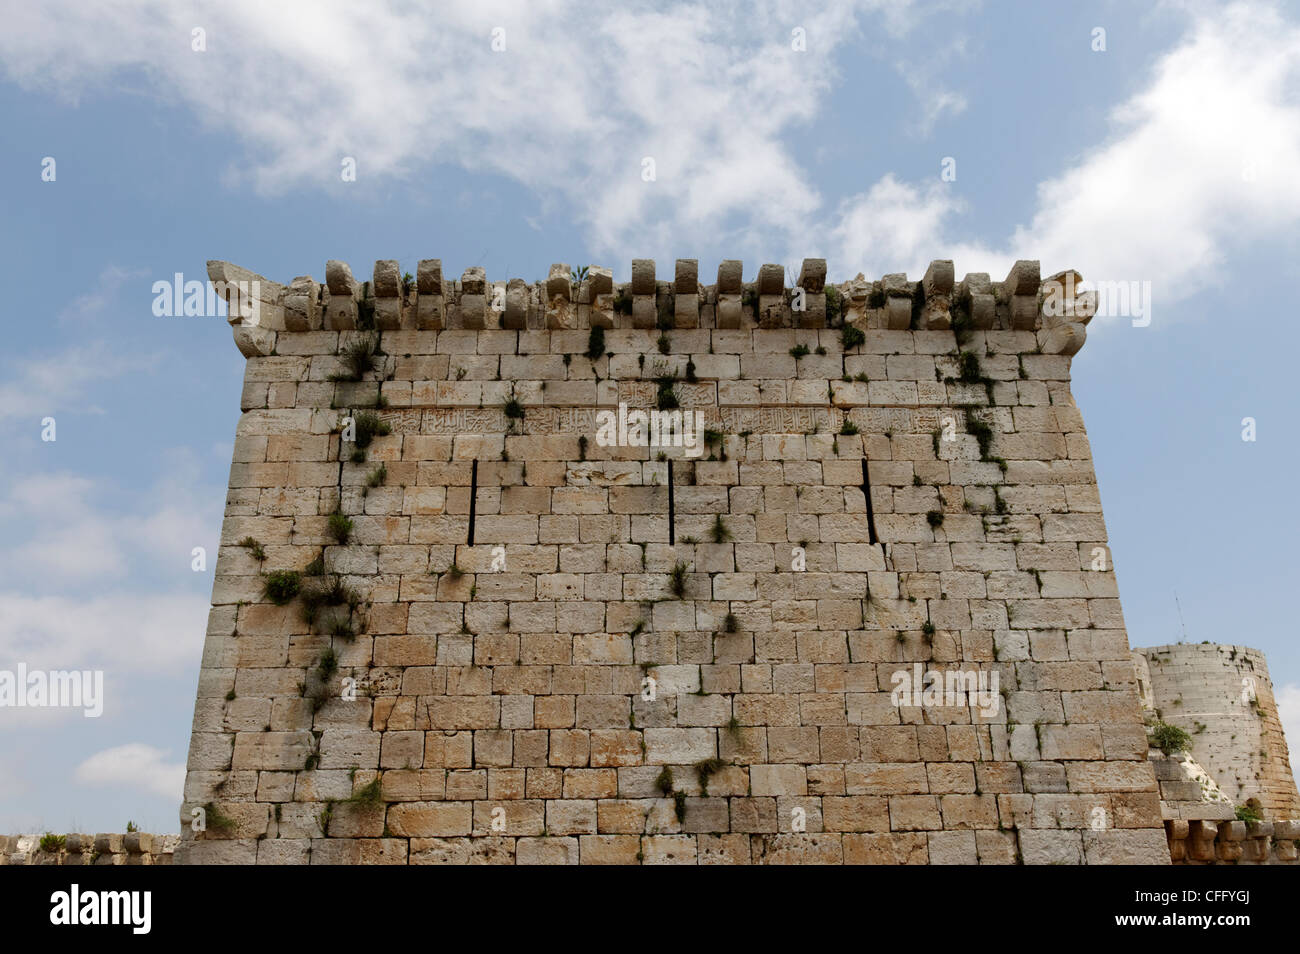 Krak des Chevaliers. Syria. View of the square tower which was the centrepiece of the lower range of defences on the southern Stock Photo